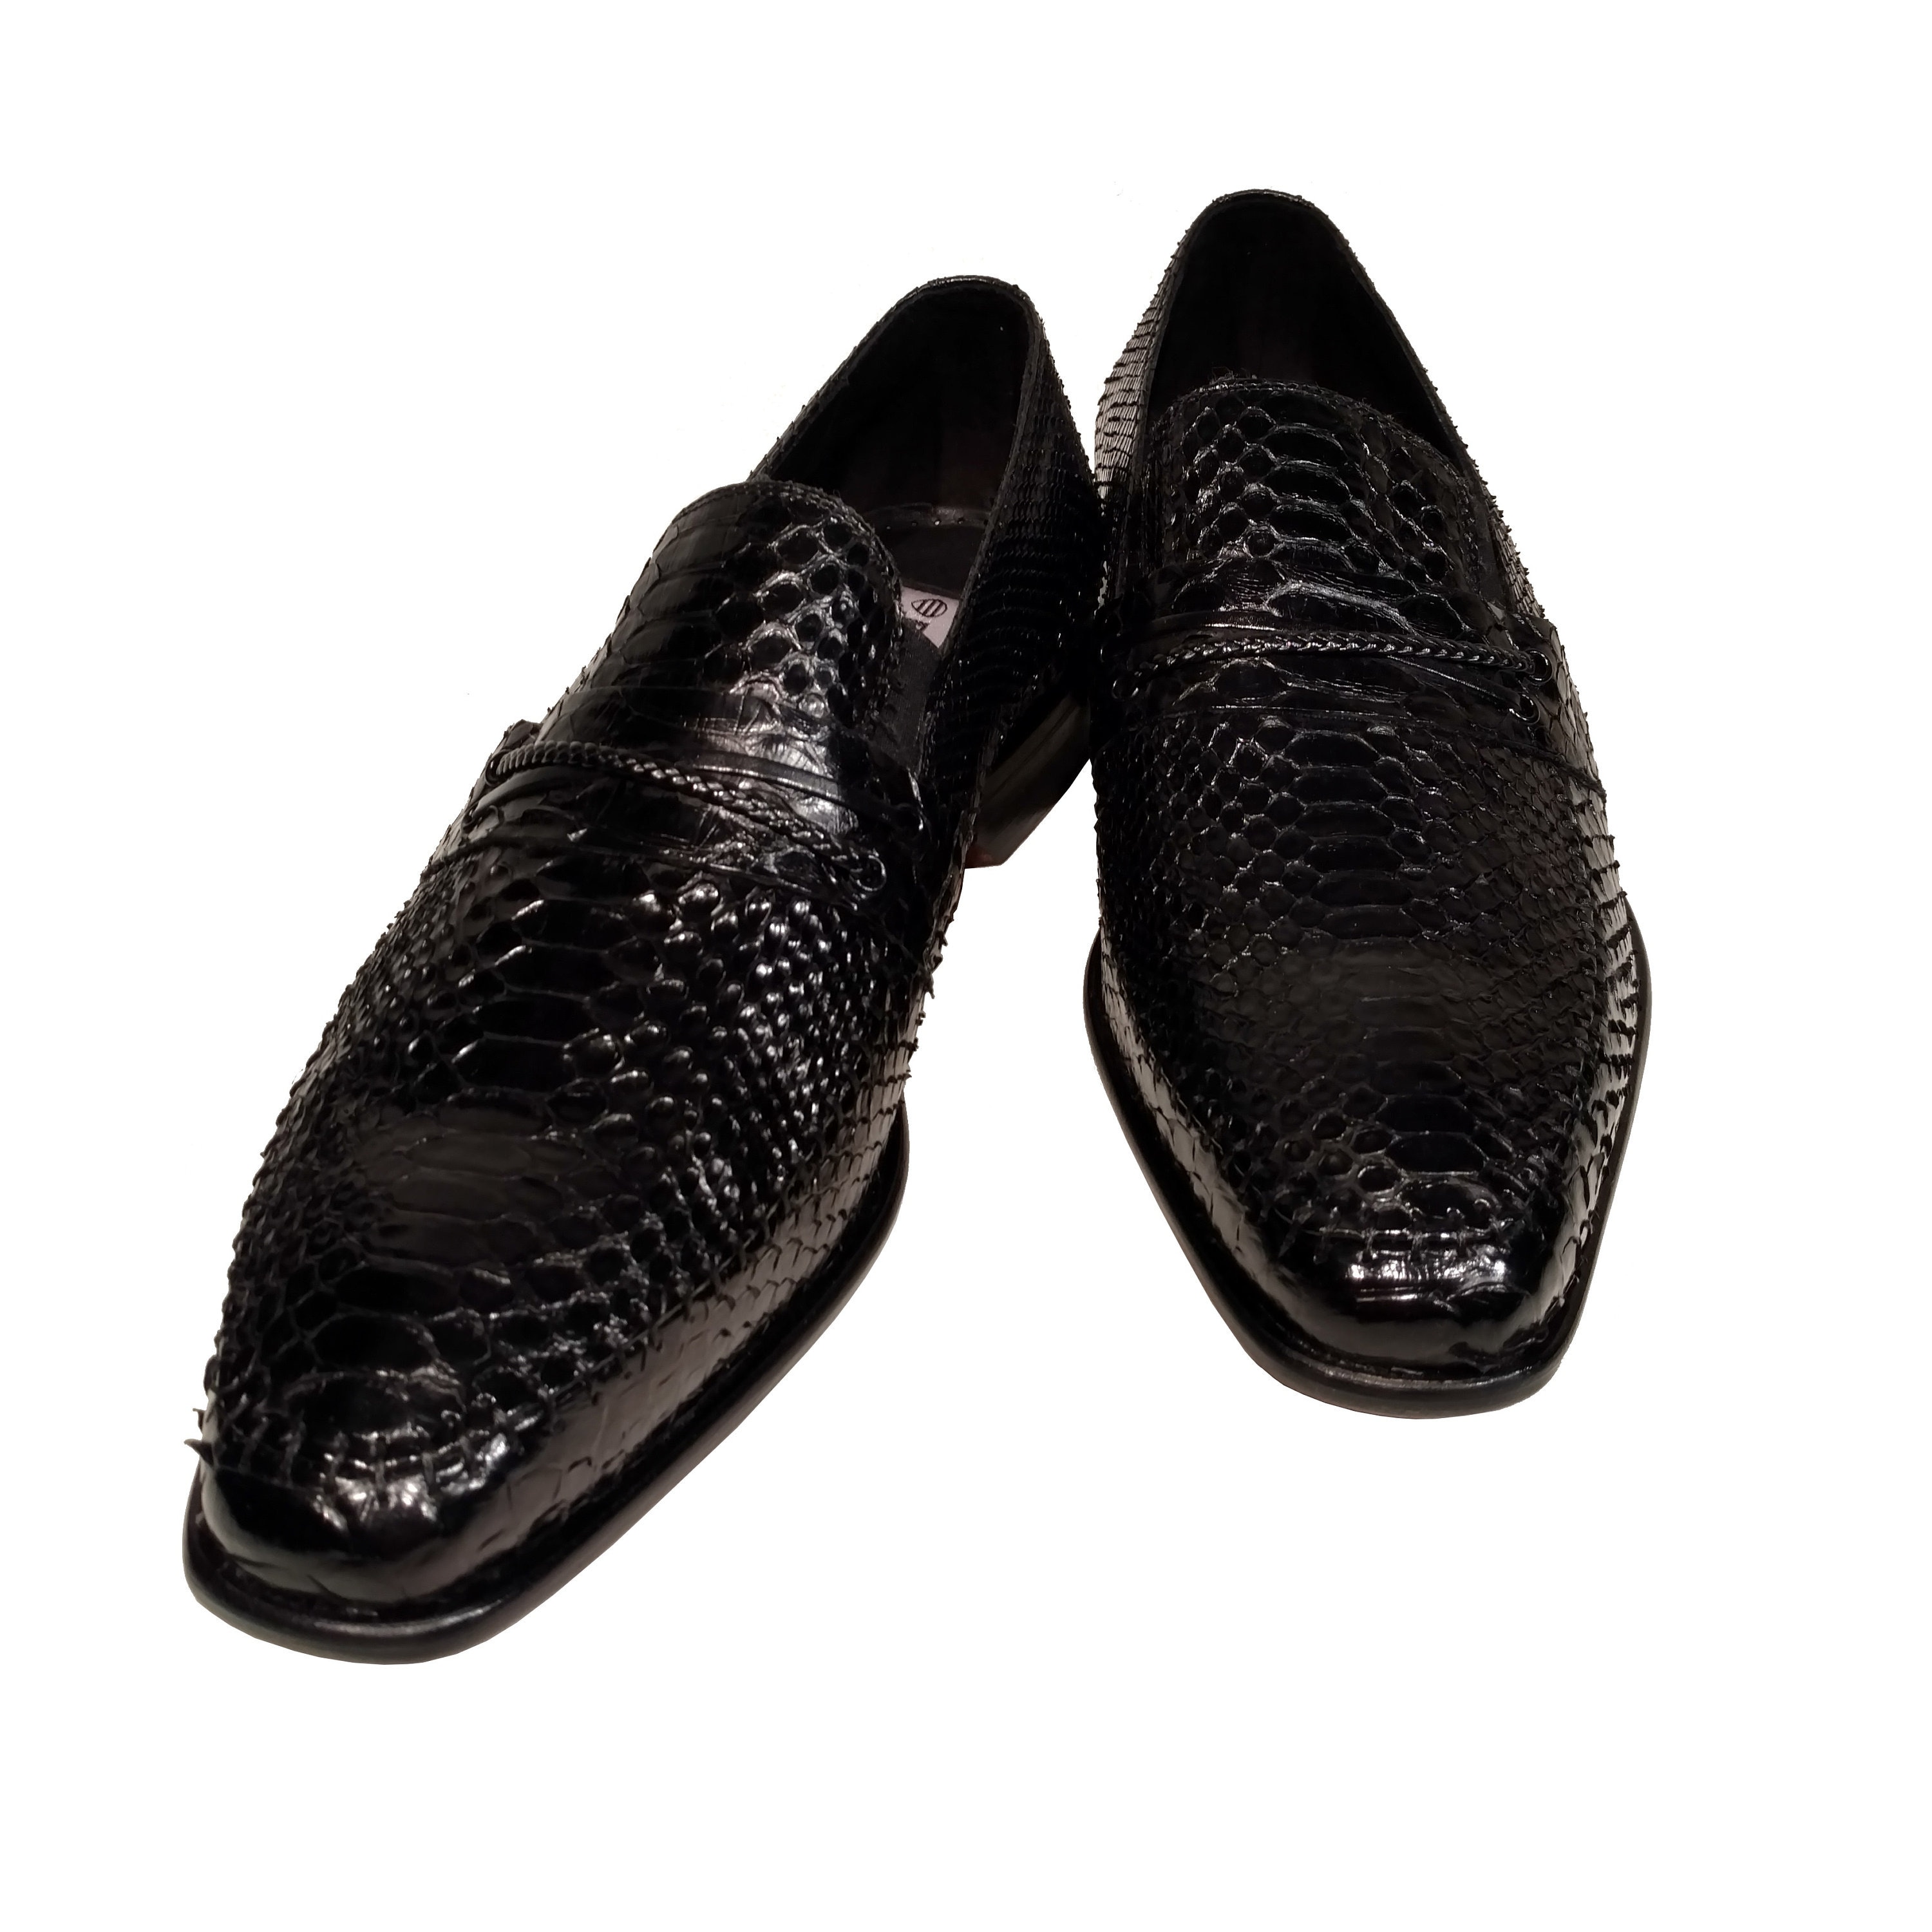 Business Snakeskin Shoes Casual Python Skin Shoes for Men  Snake skin  shoes Dress shoes men Sneaker dress shoes